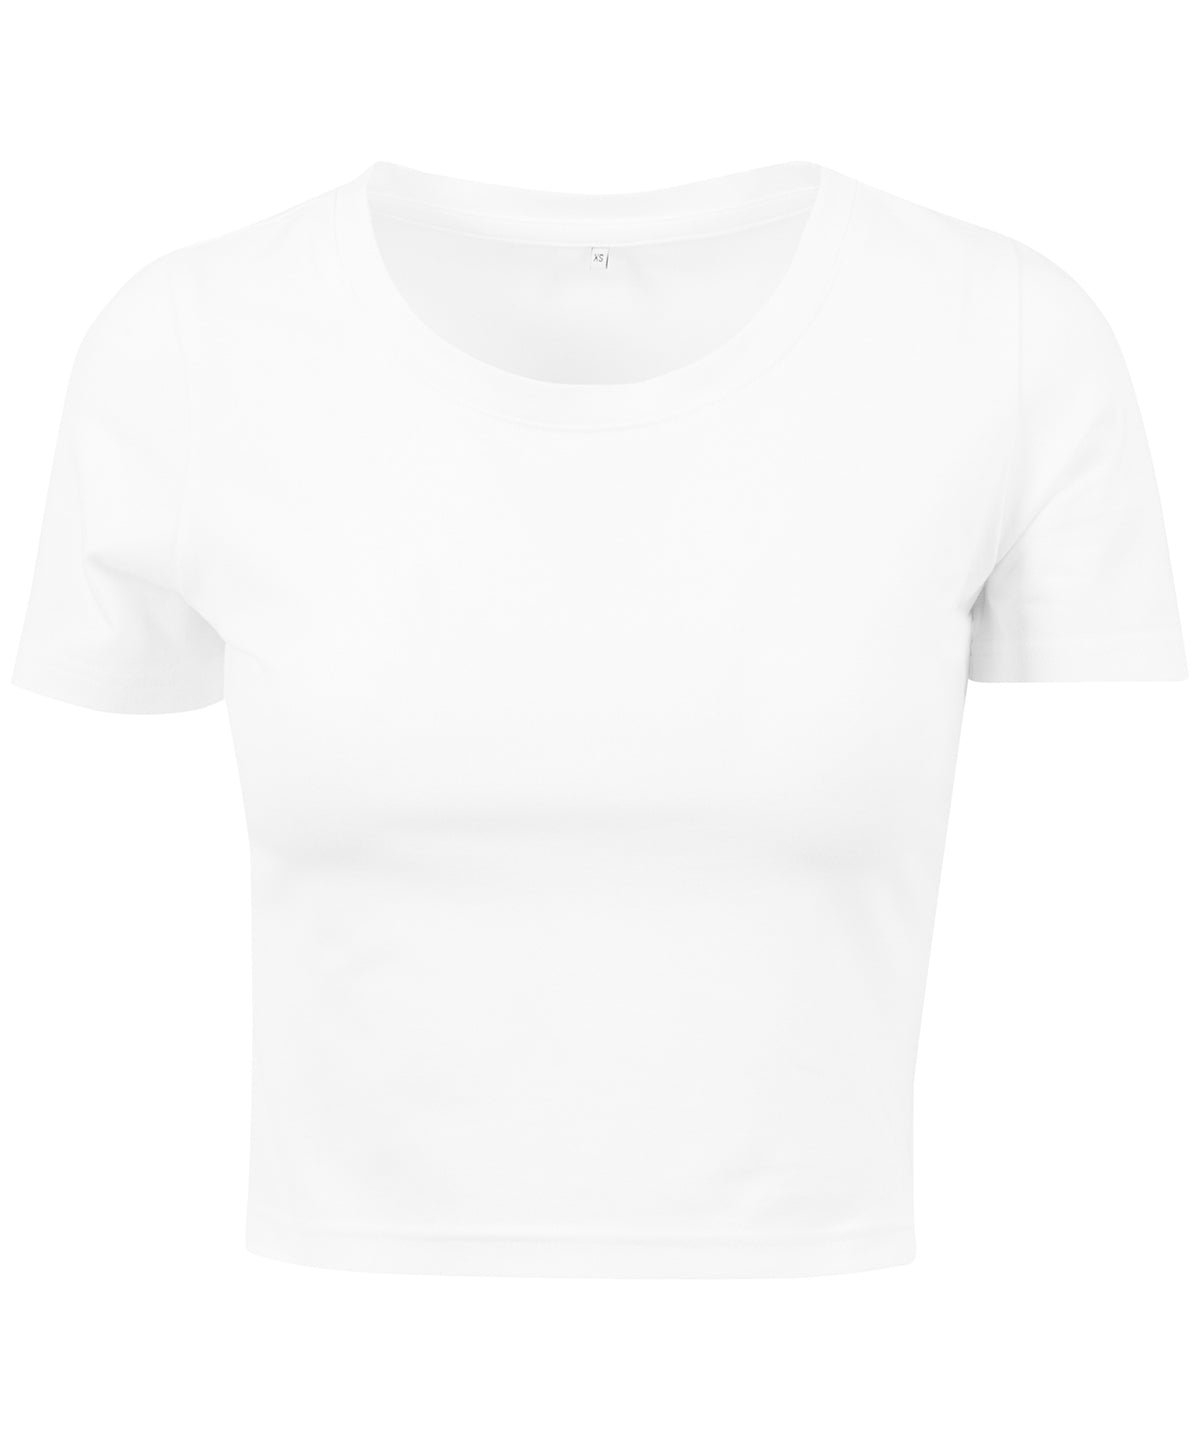 Personalised T-Shirts - Light Grey Build Your Brand Women's cropped tee